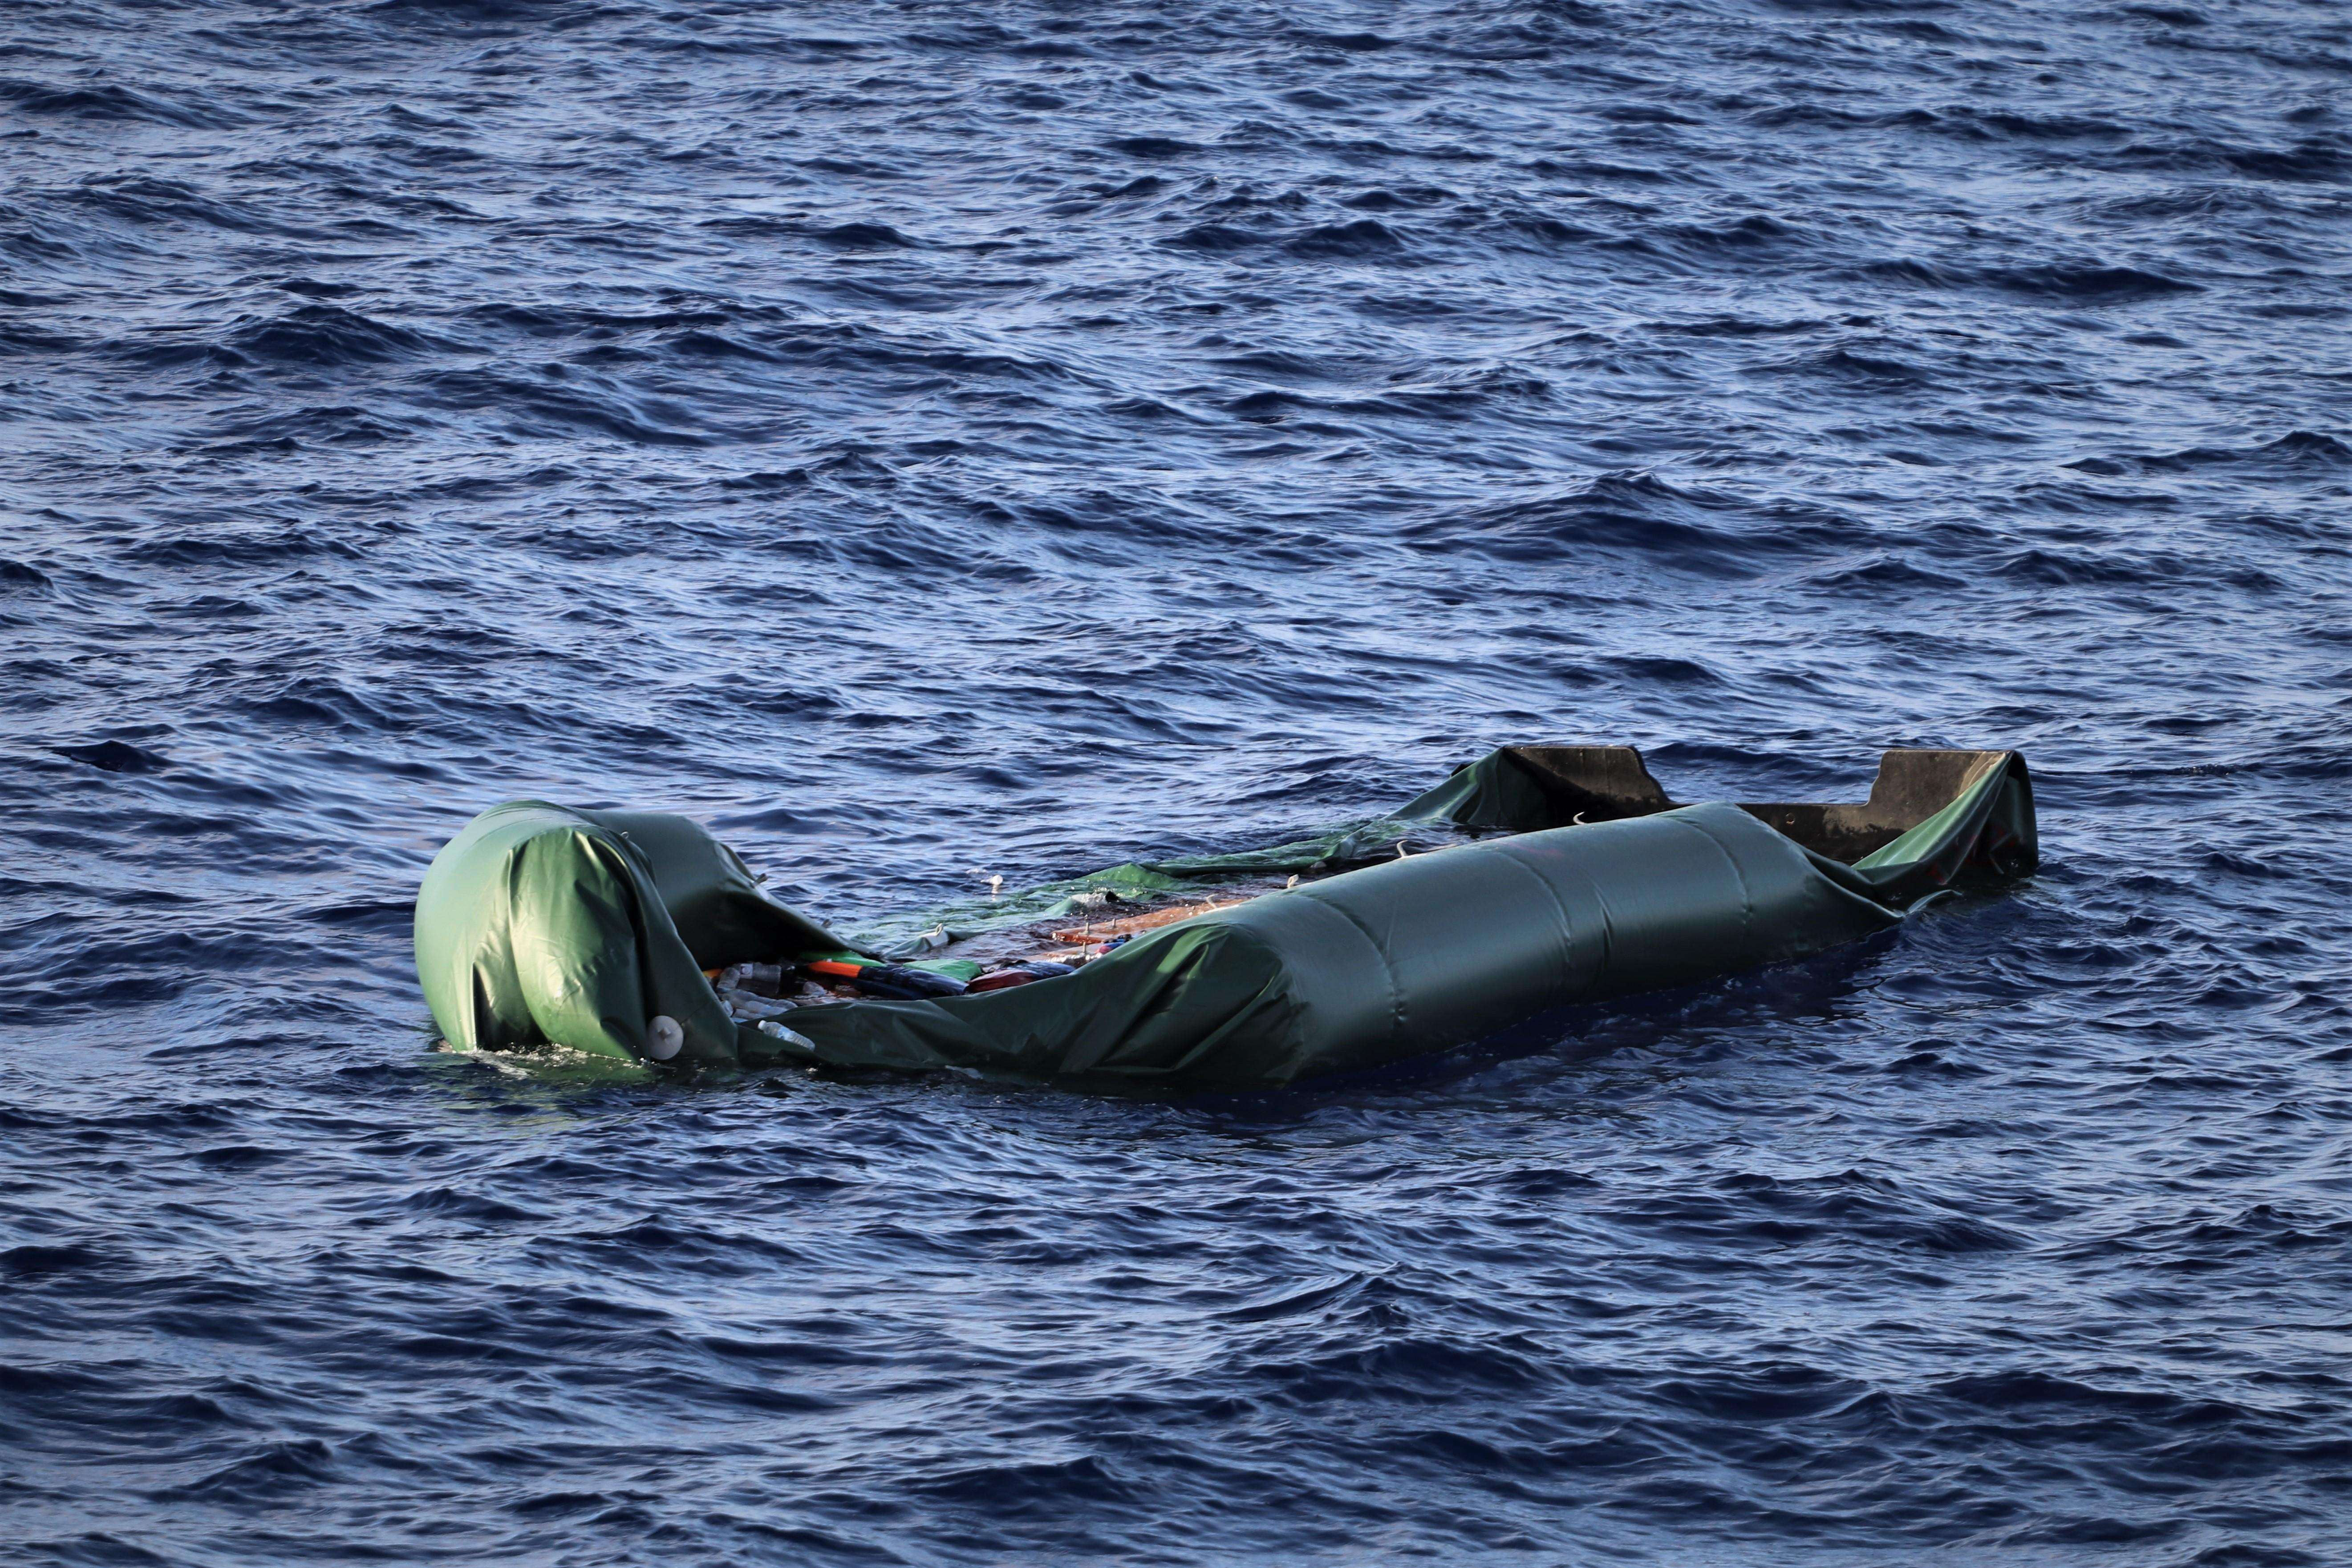 A rubber boat drifts in the Mediterranean Sea in August, 2020. 